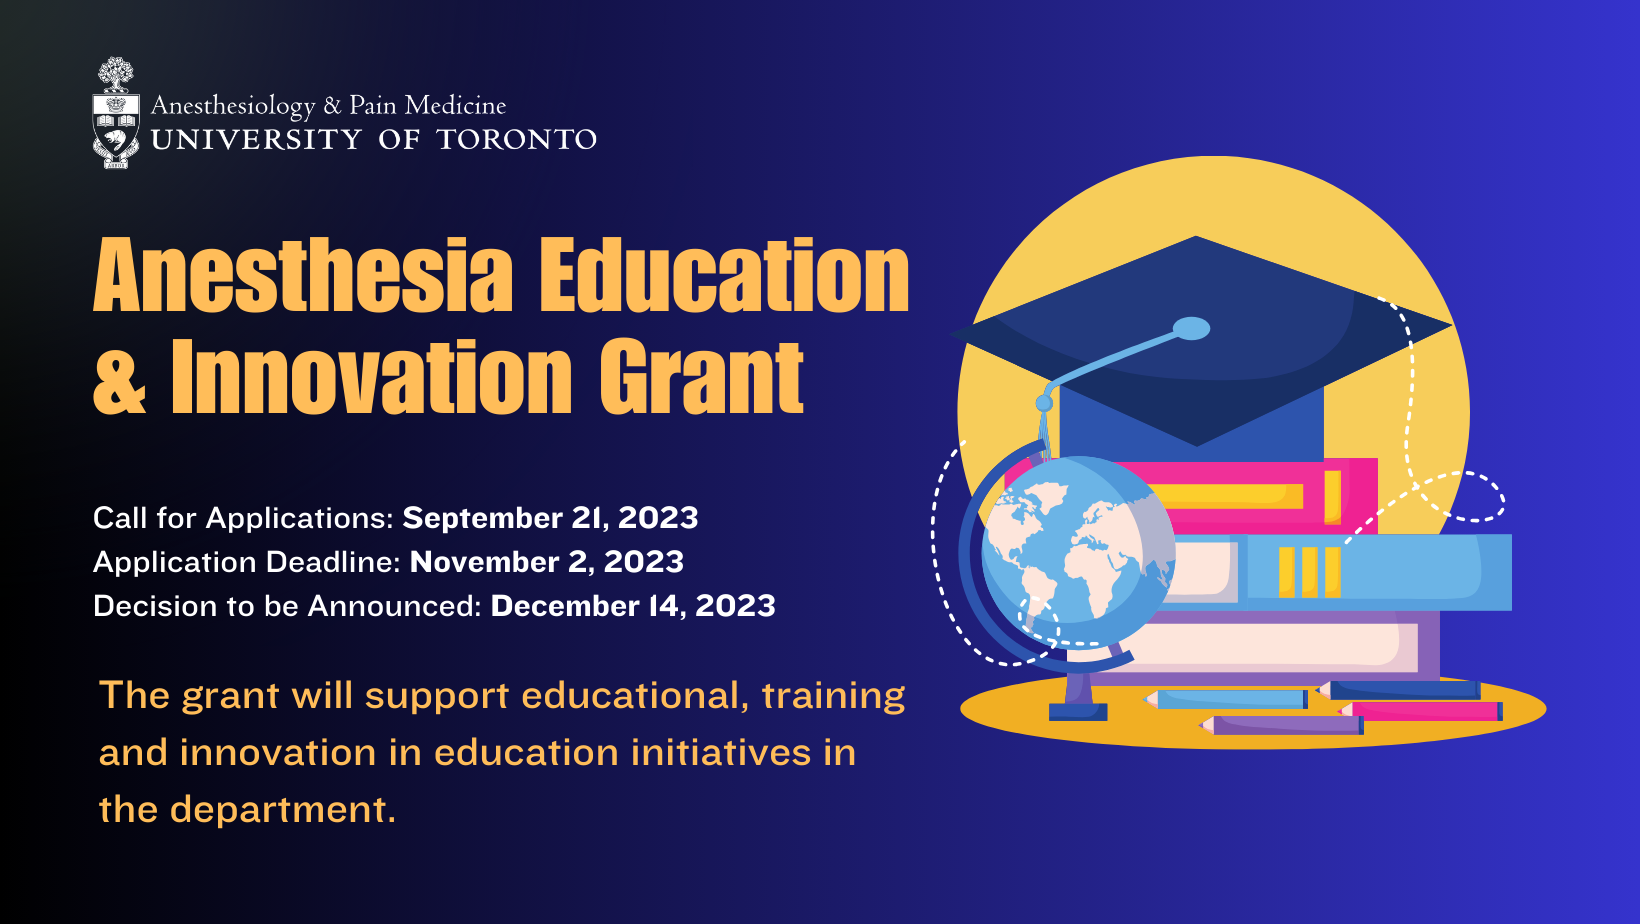 Anesthesia Education & Innovation Grant